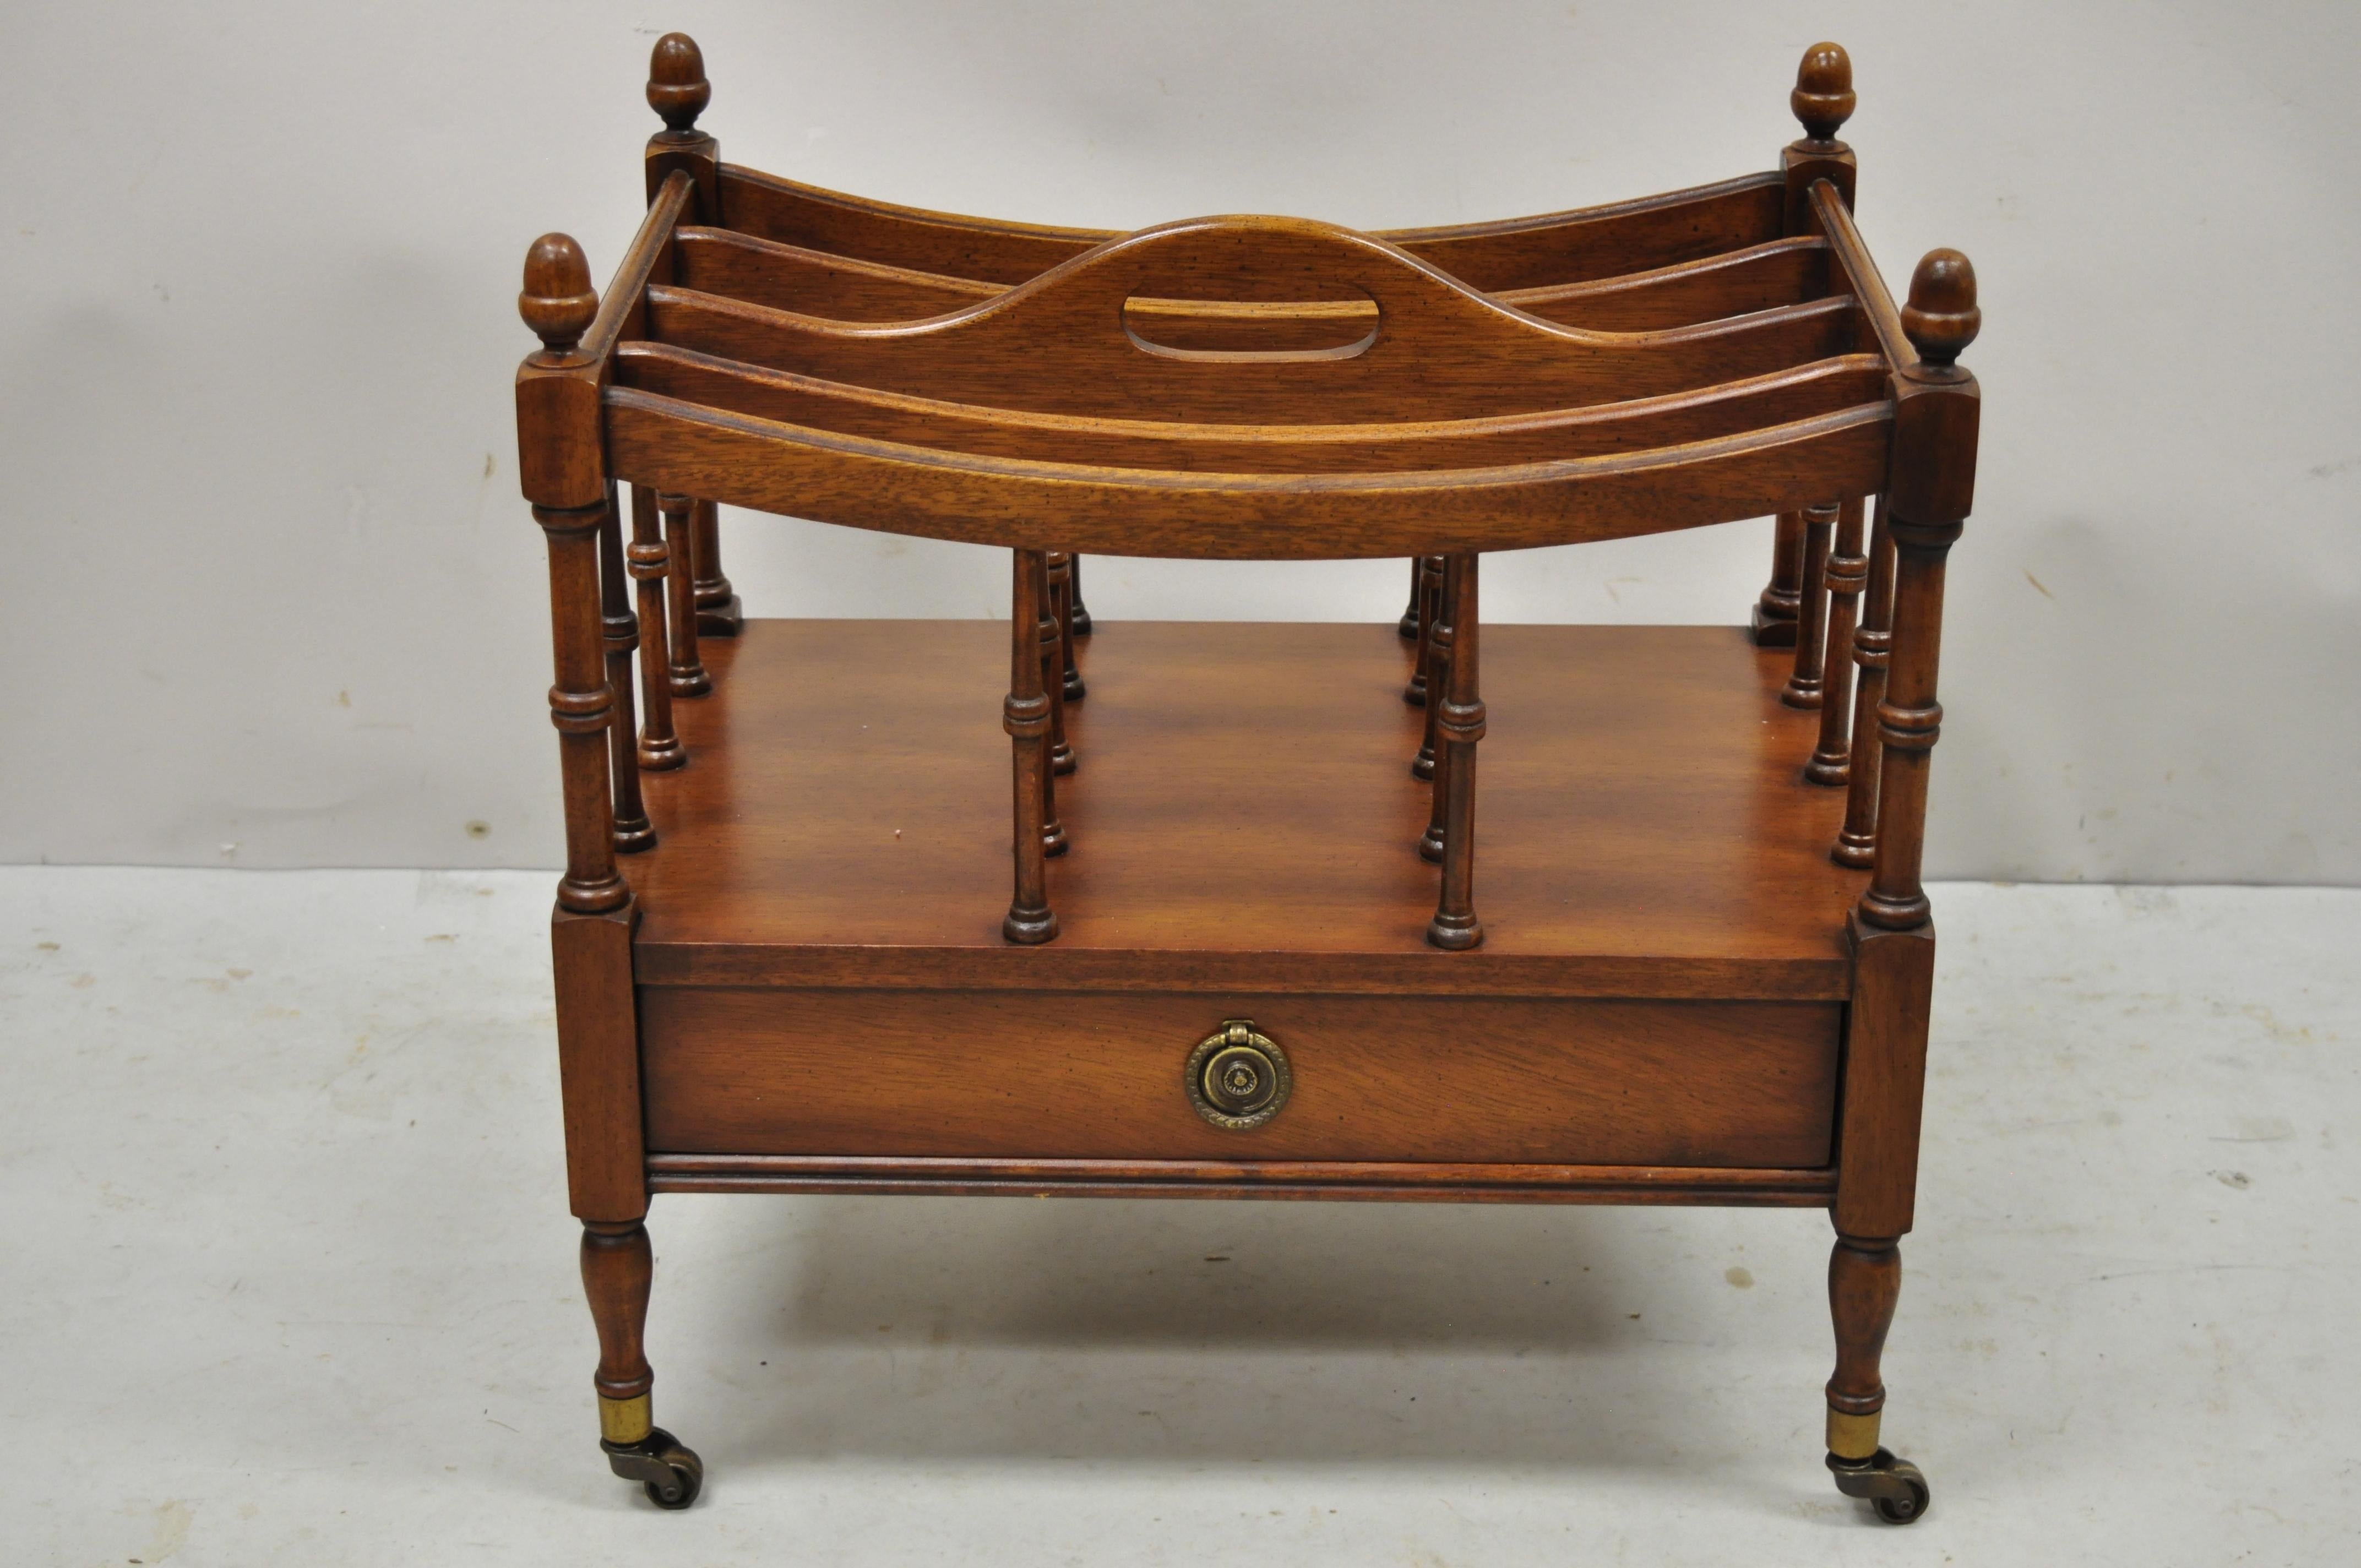 Antique English Regency mahogany canterbury magazine rack w/ drawer by Columbia. Item features brass rolling casters, beautiful wood grain, original label, 1 drawer, very nice antique item, quality American craftsmanship, great style and form. Circa